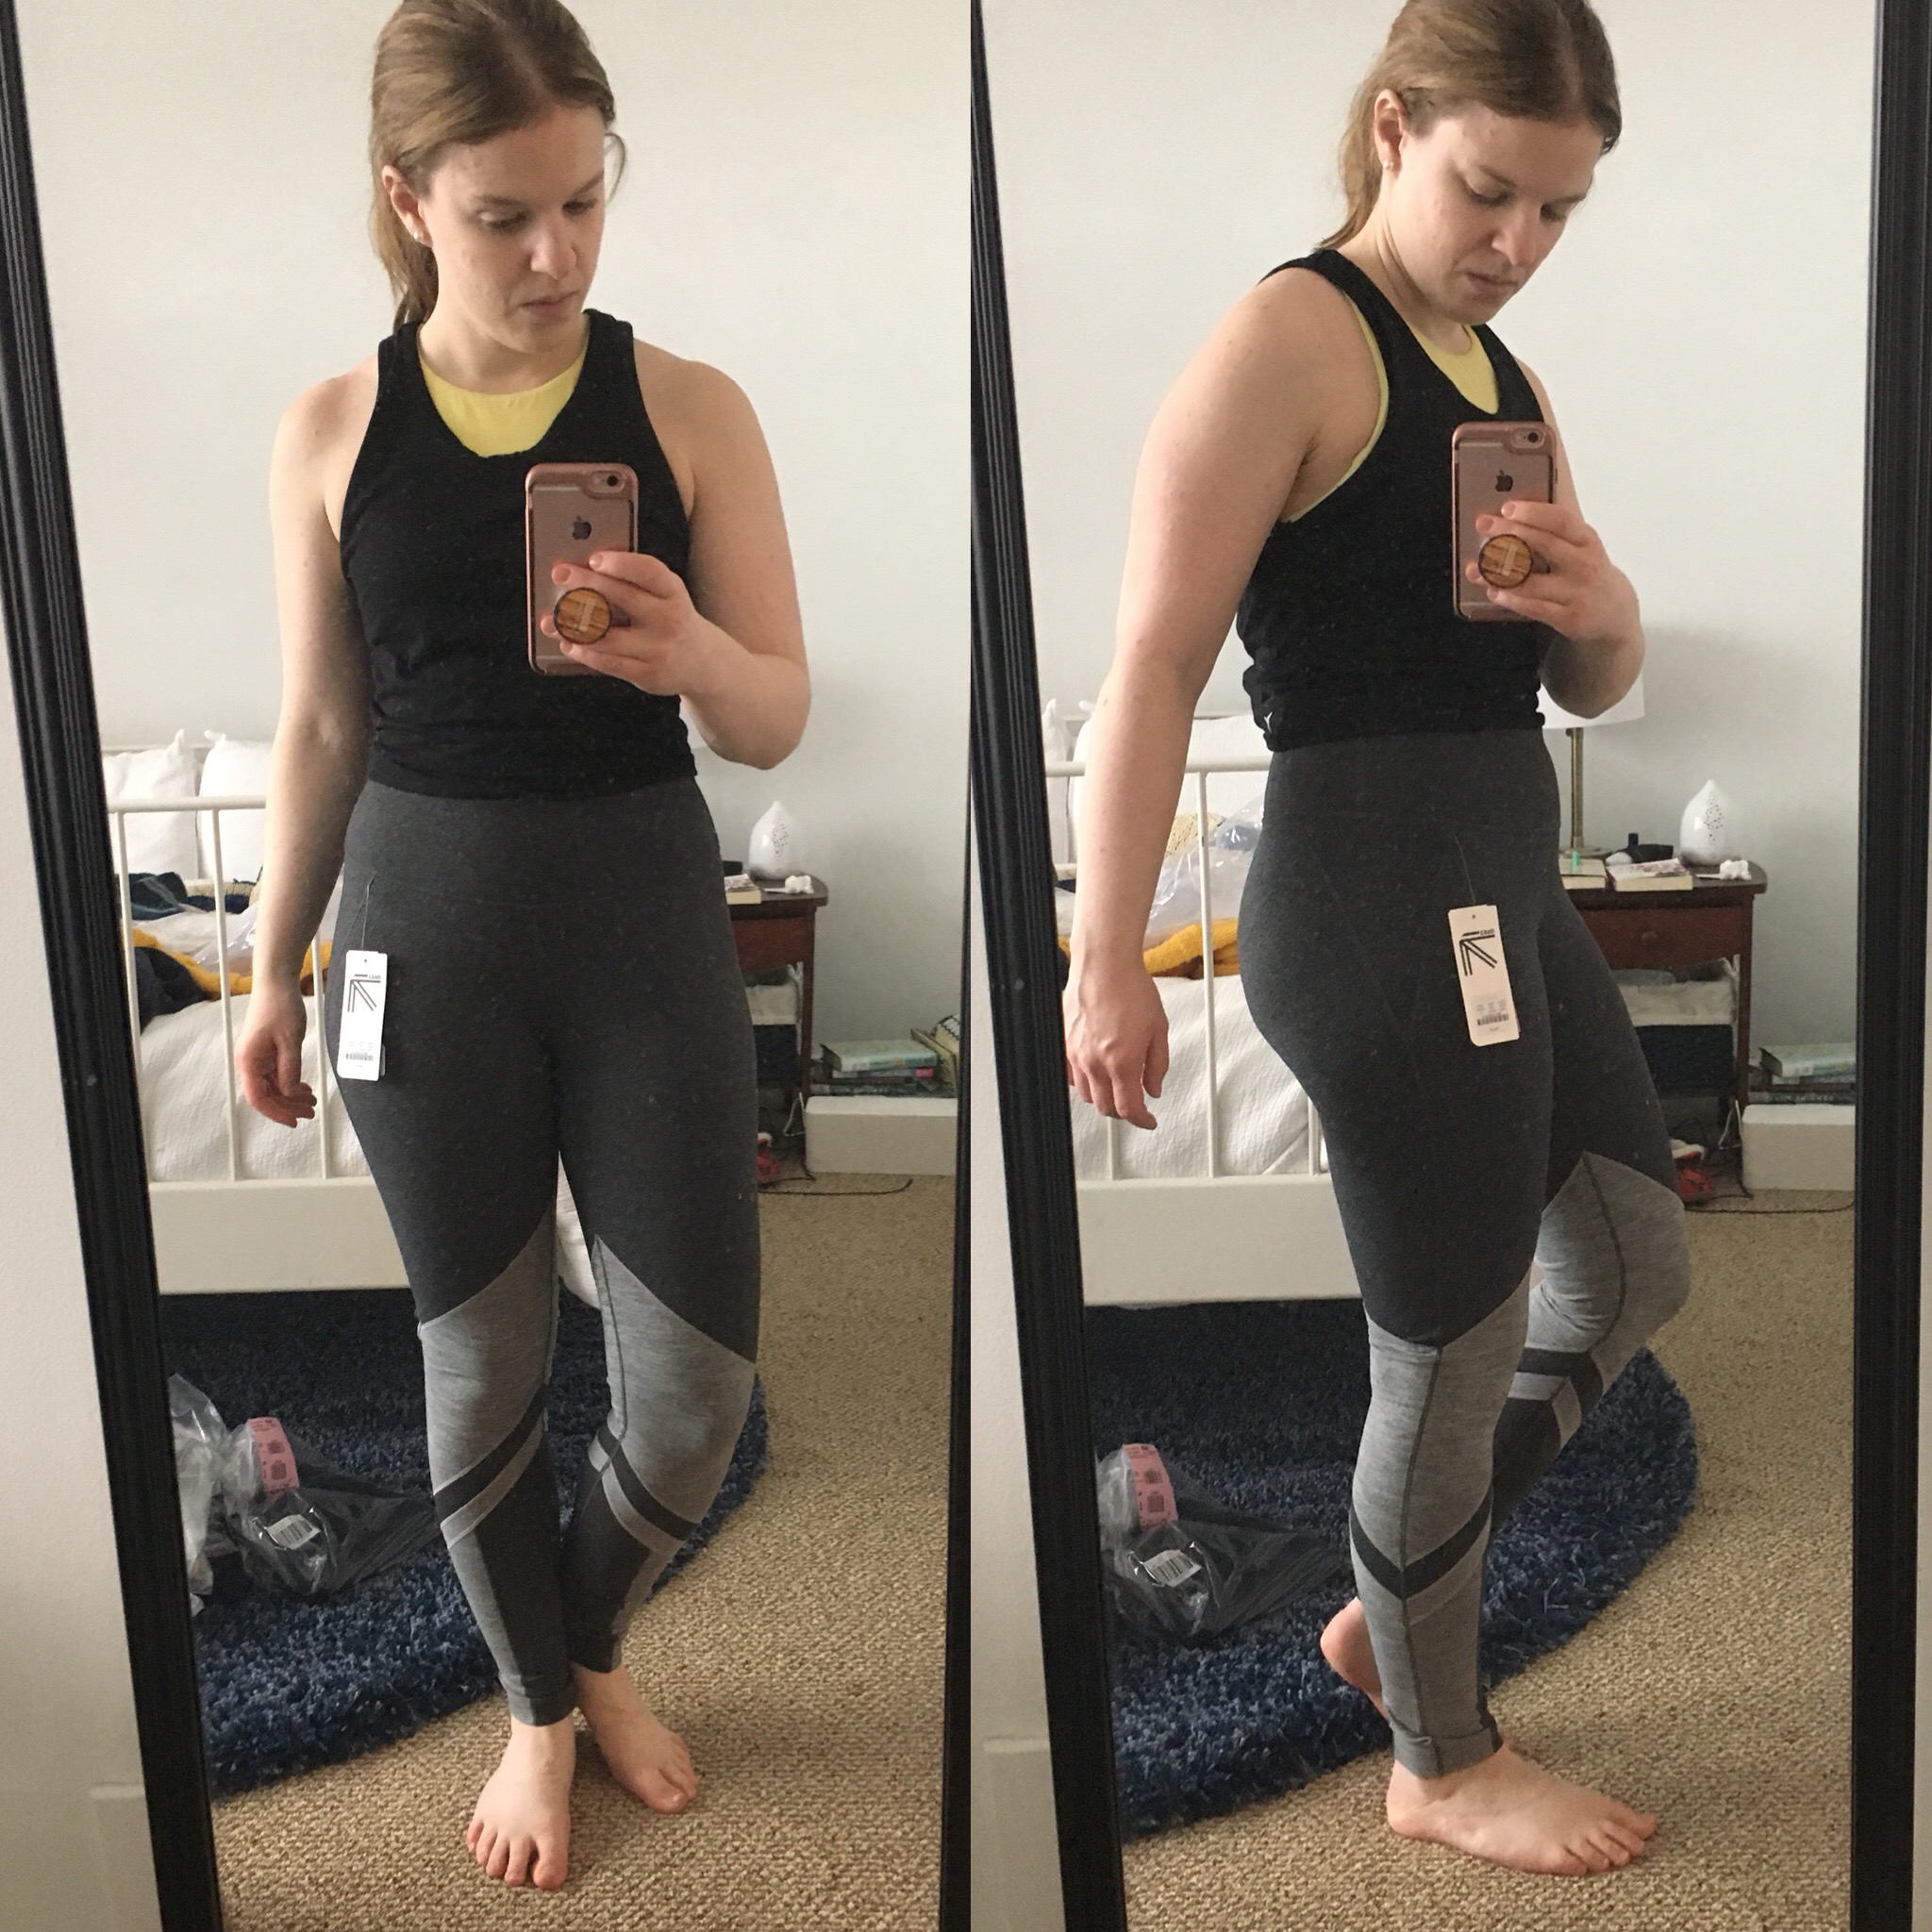 Shopping Reviews, Vol. 53: J.Crew Factory Activewear, Shopping Reviews, Vol. 53: J.Crew Factory Activewear, | Something Good, , @danaerinw, New Balance® for J.Crew performance leggings in striped colorblock